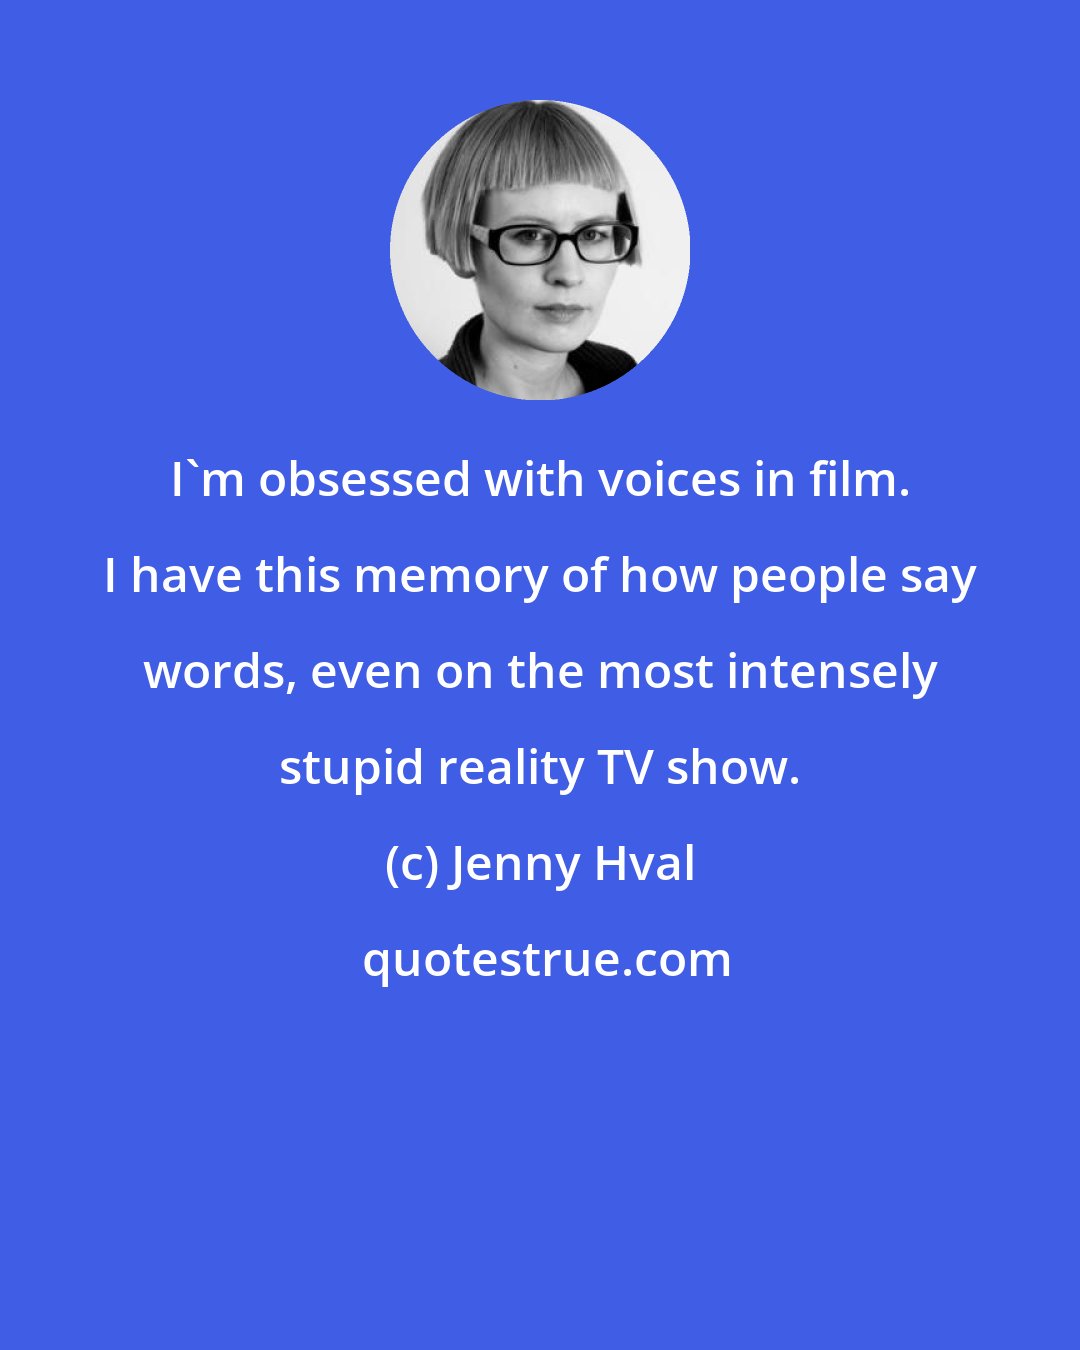 Jenny Hval: I'm obsessed with voices in film. I have this memory of how people say words, even on the most intensely stupid reality TV show.